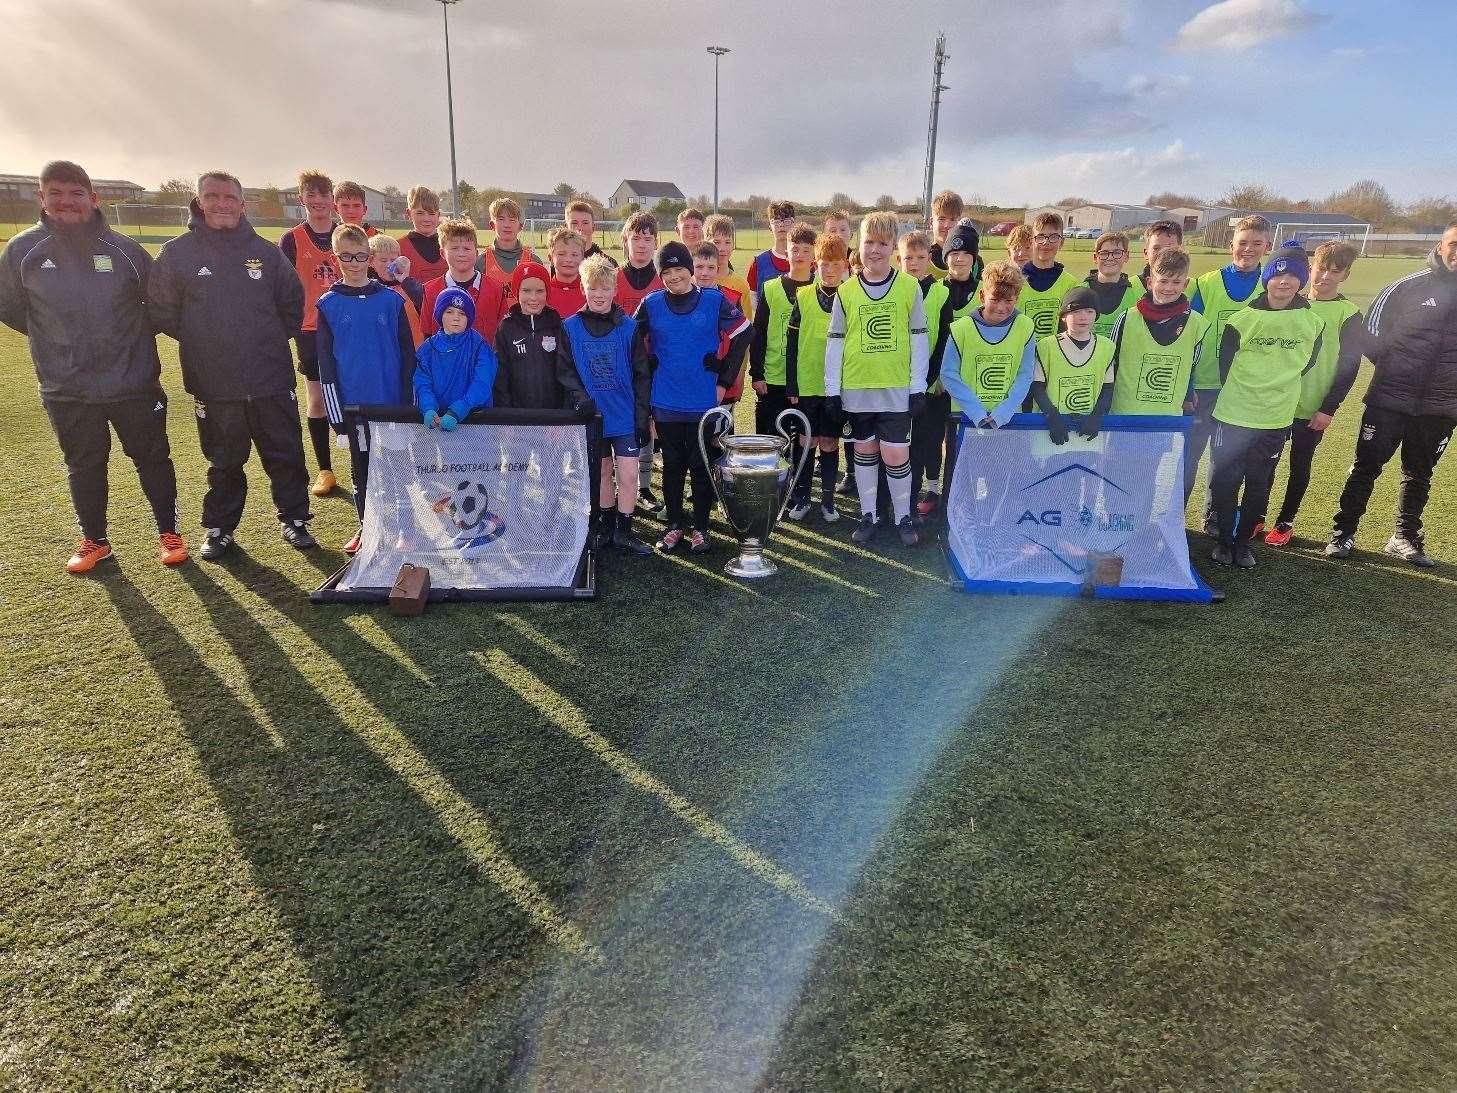 Three age groups of players under went a session with Benfica coaches Joao Rosmaniho and Serguei Kandaurov - pictured is the older 11-15 bracket at Thurso Football Academy.